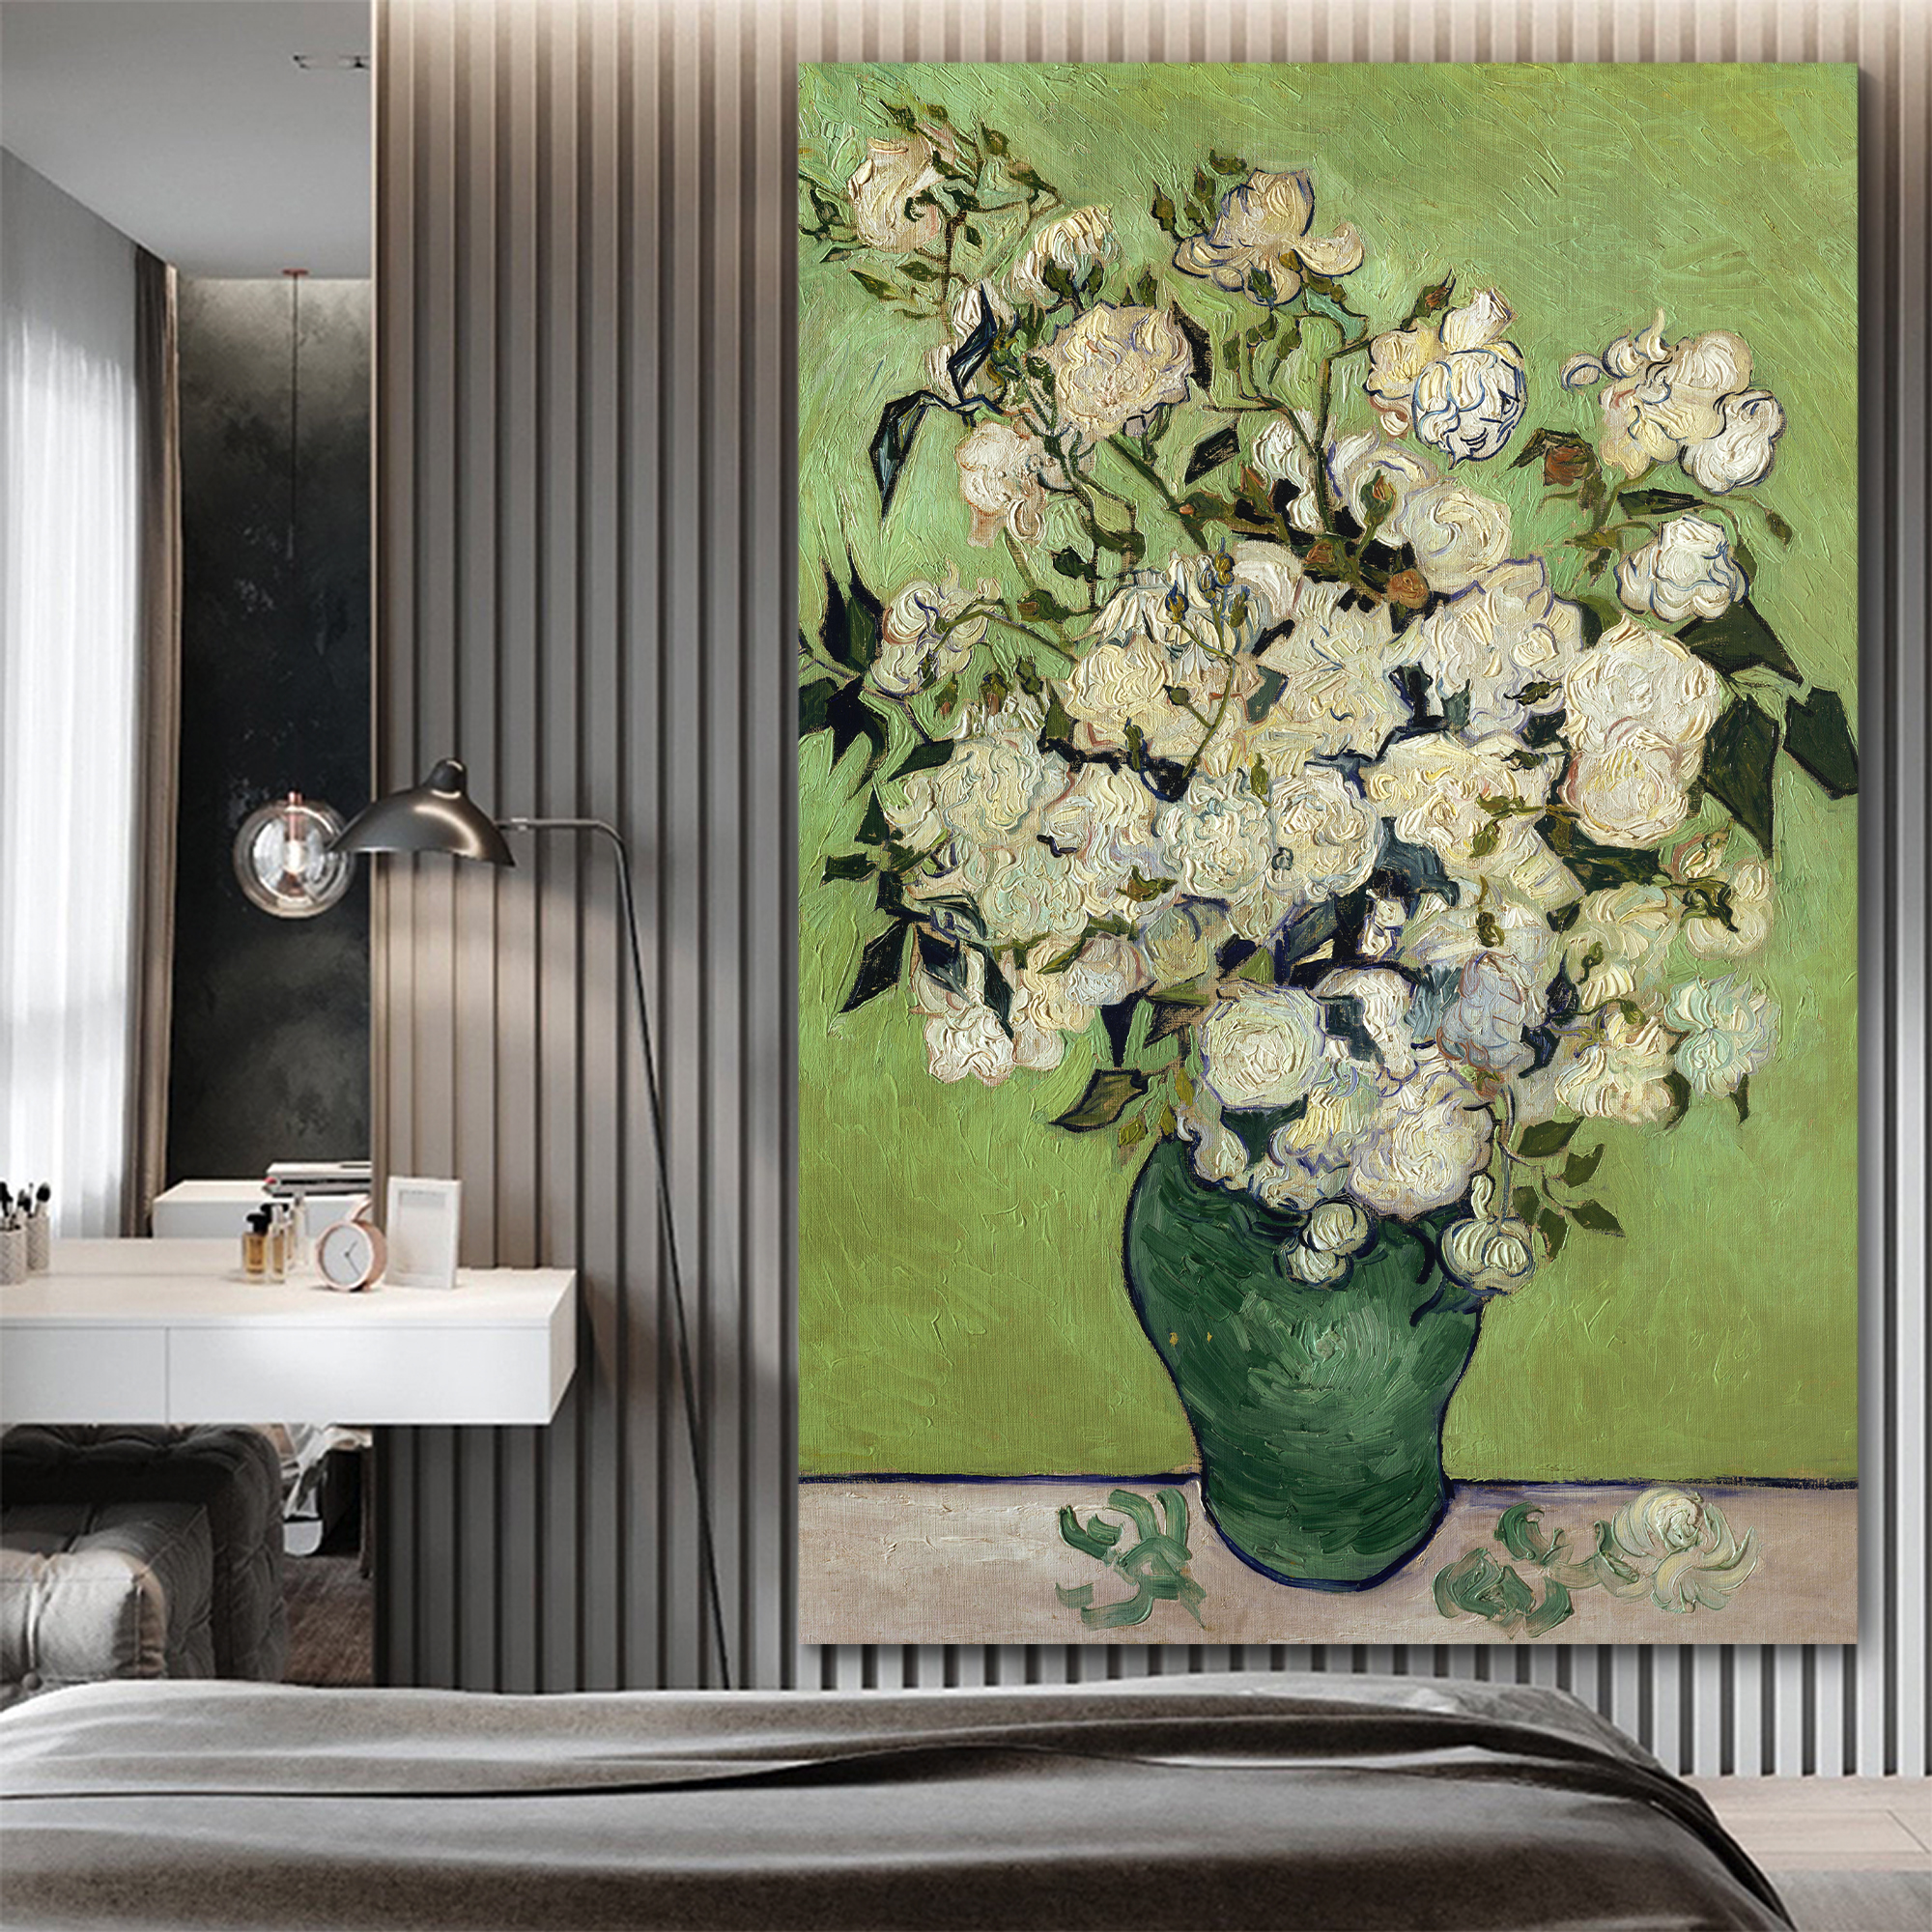 Irises and Roses by Vincent Van Gogh - Oil Painting Reproduction on Canvas Prints Wall Art, Ready to Hang - 32